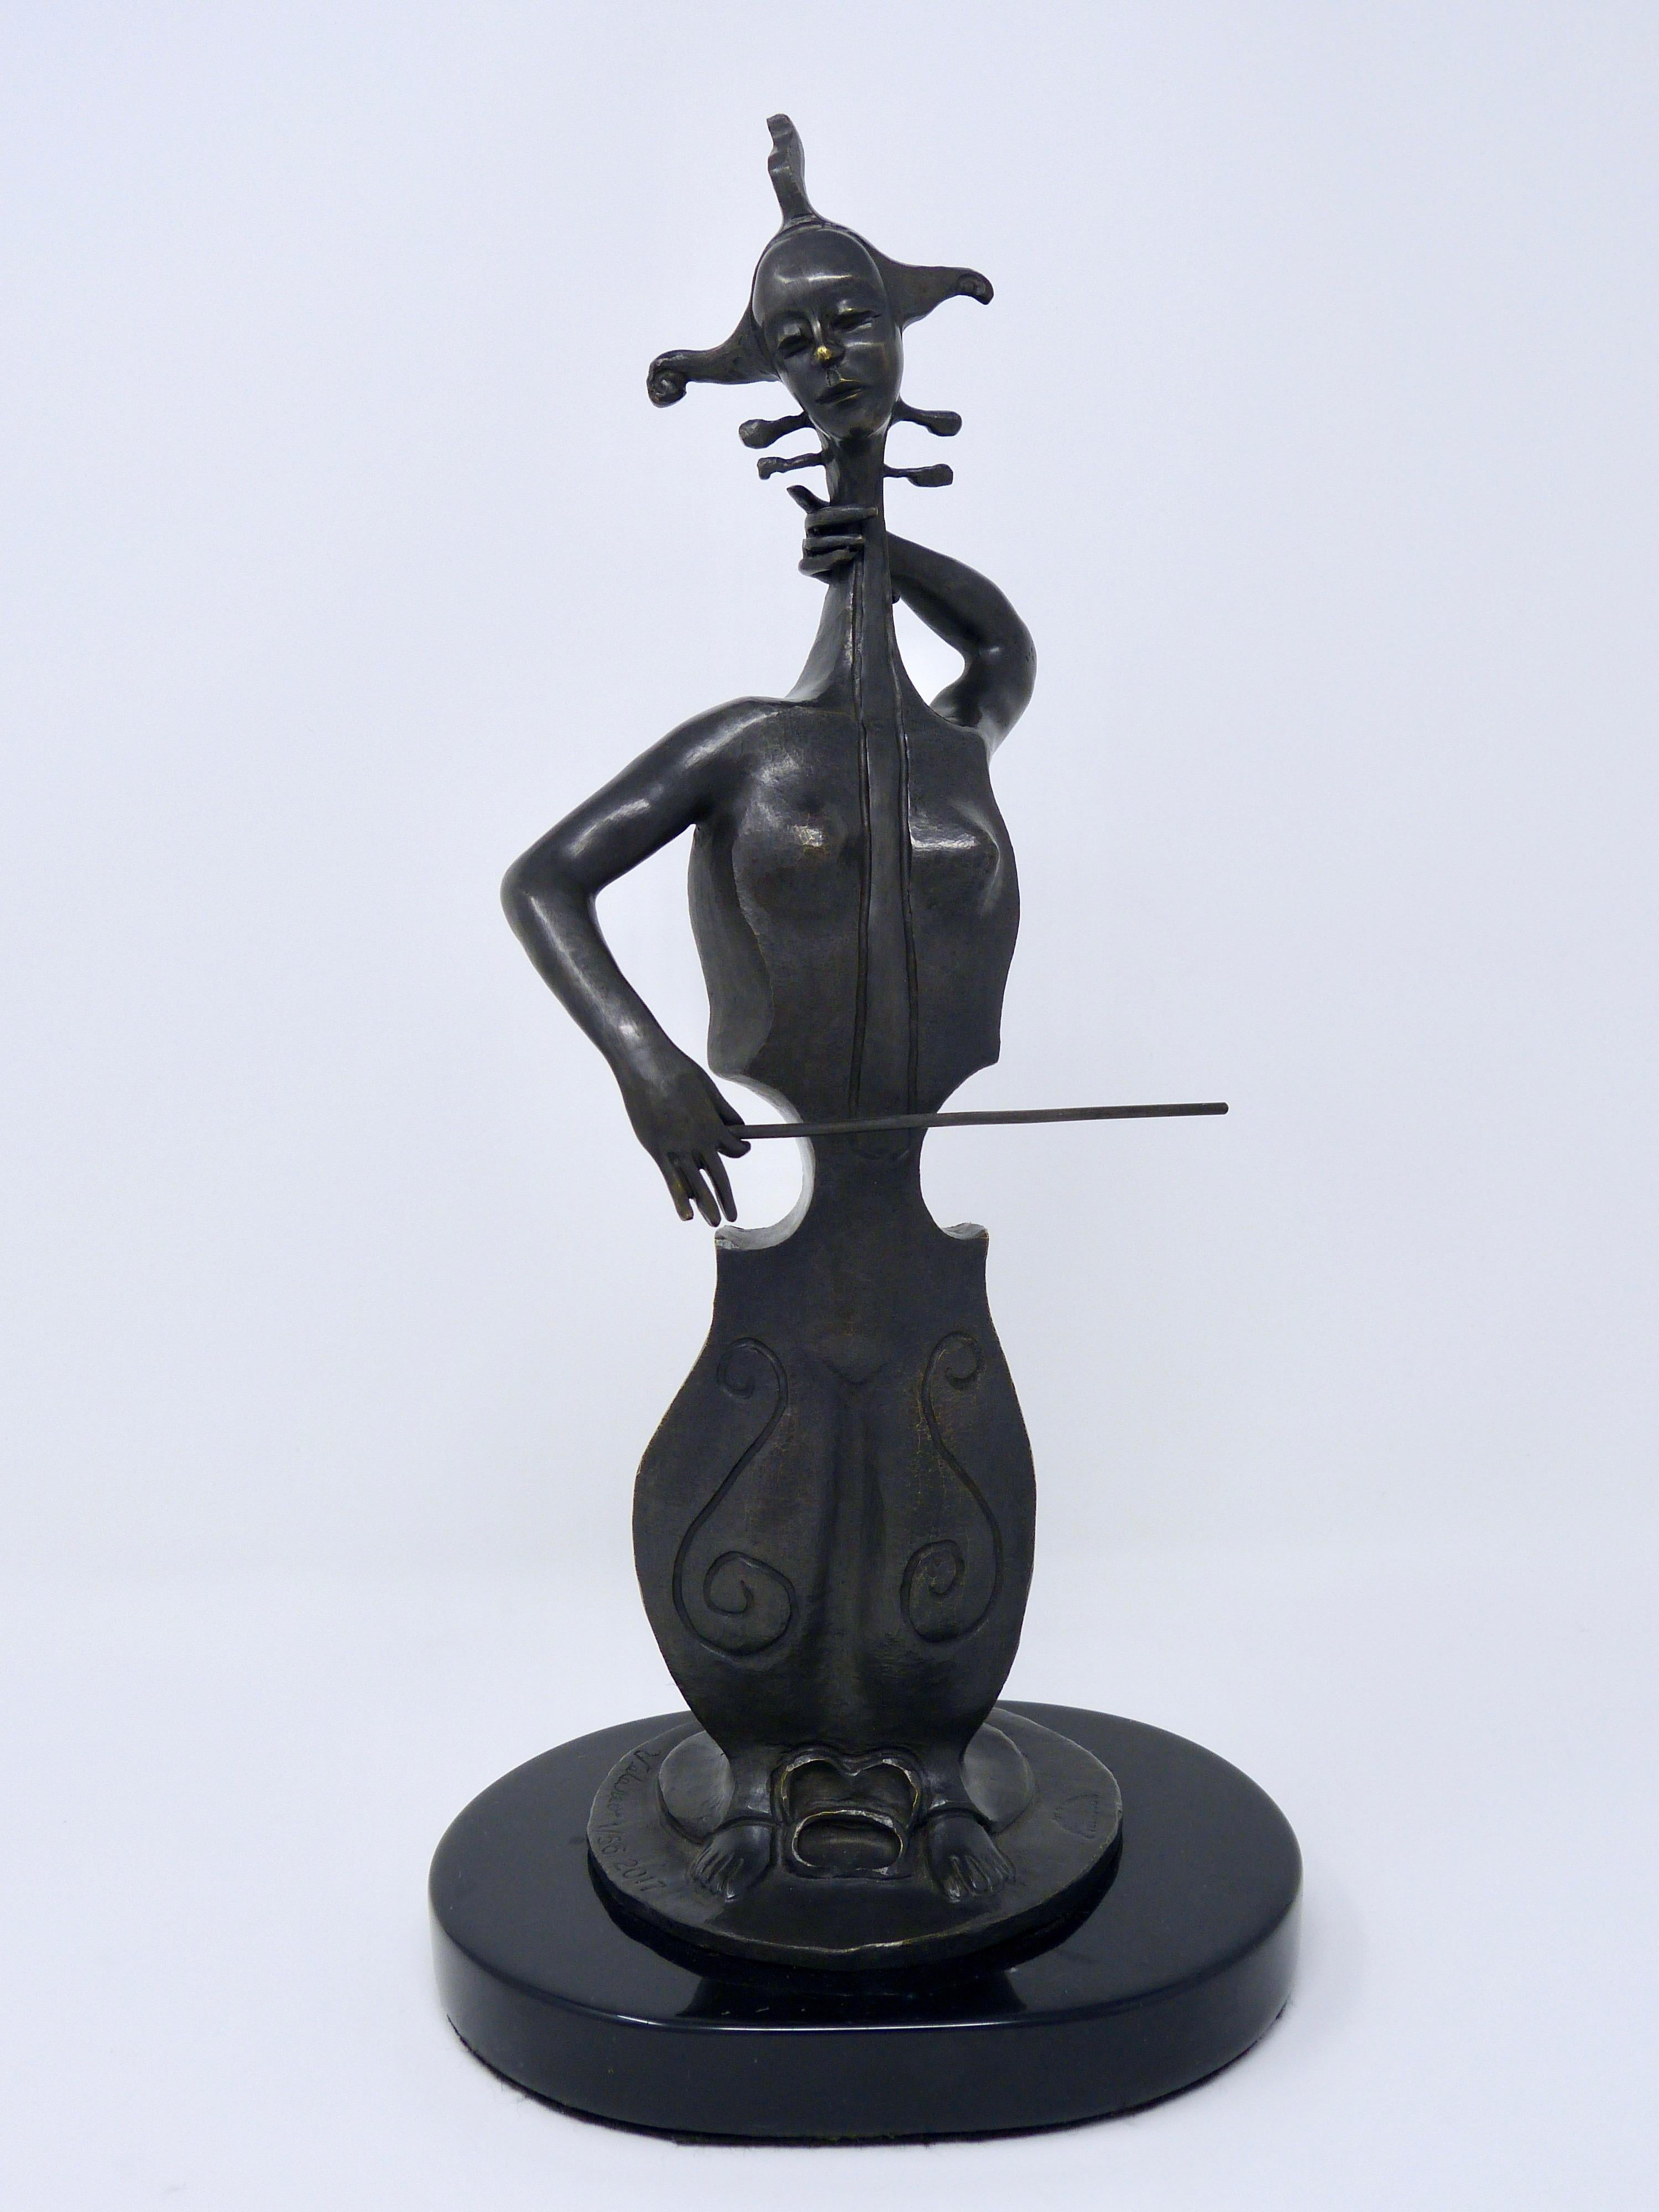 Title: Mujer Chelo (Lady Cello)
Author: Alejandro Velasco
Year 2017
Technique: Lost wax bronze
Edition: 1/56
Signed by artist.